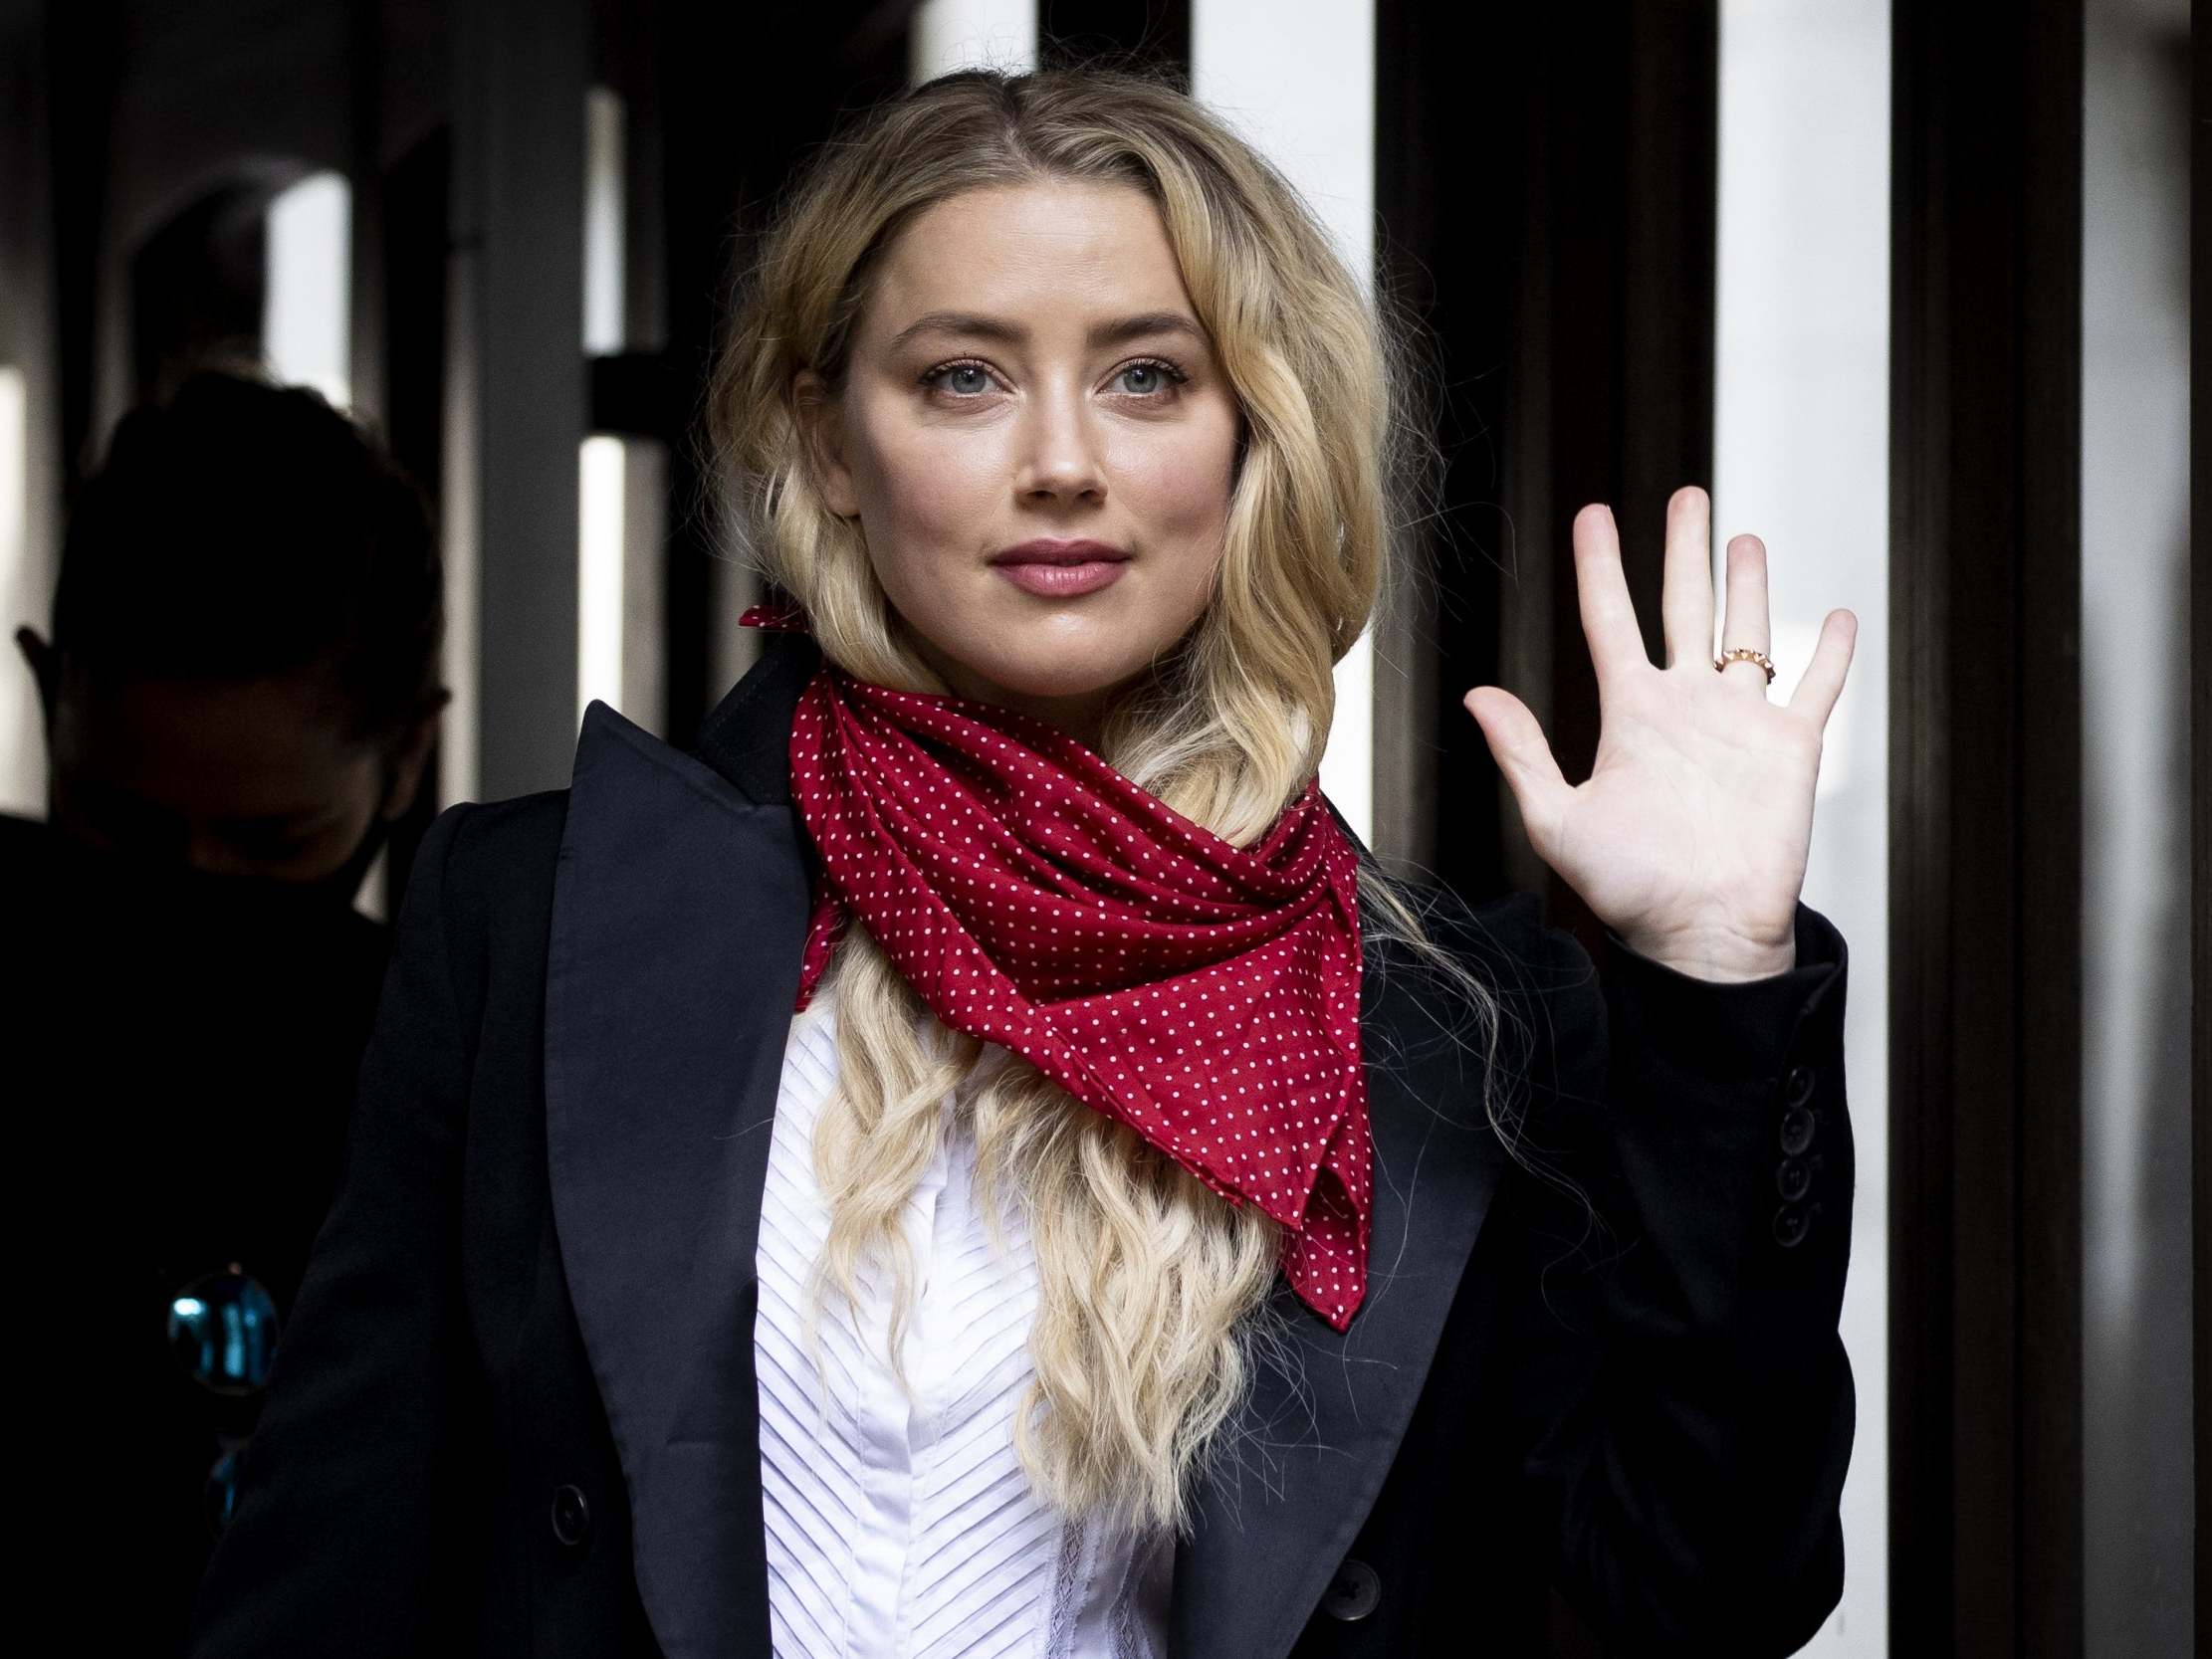 American Actress Amber Heard arrives at the High Court in London, 14 July 2020.